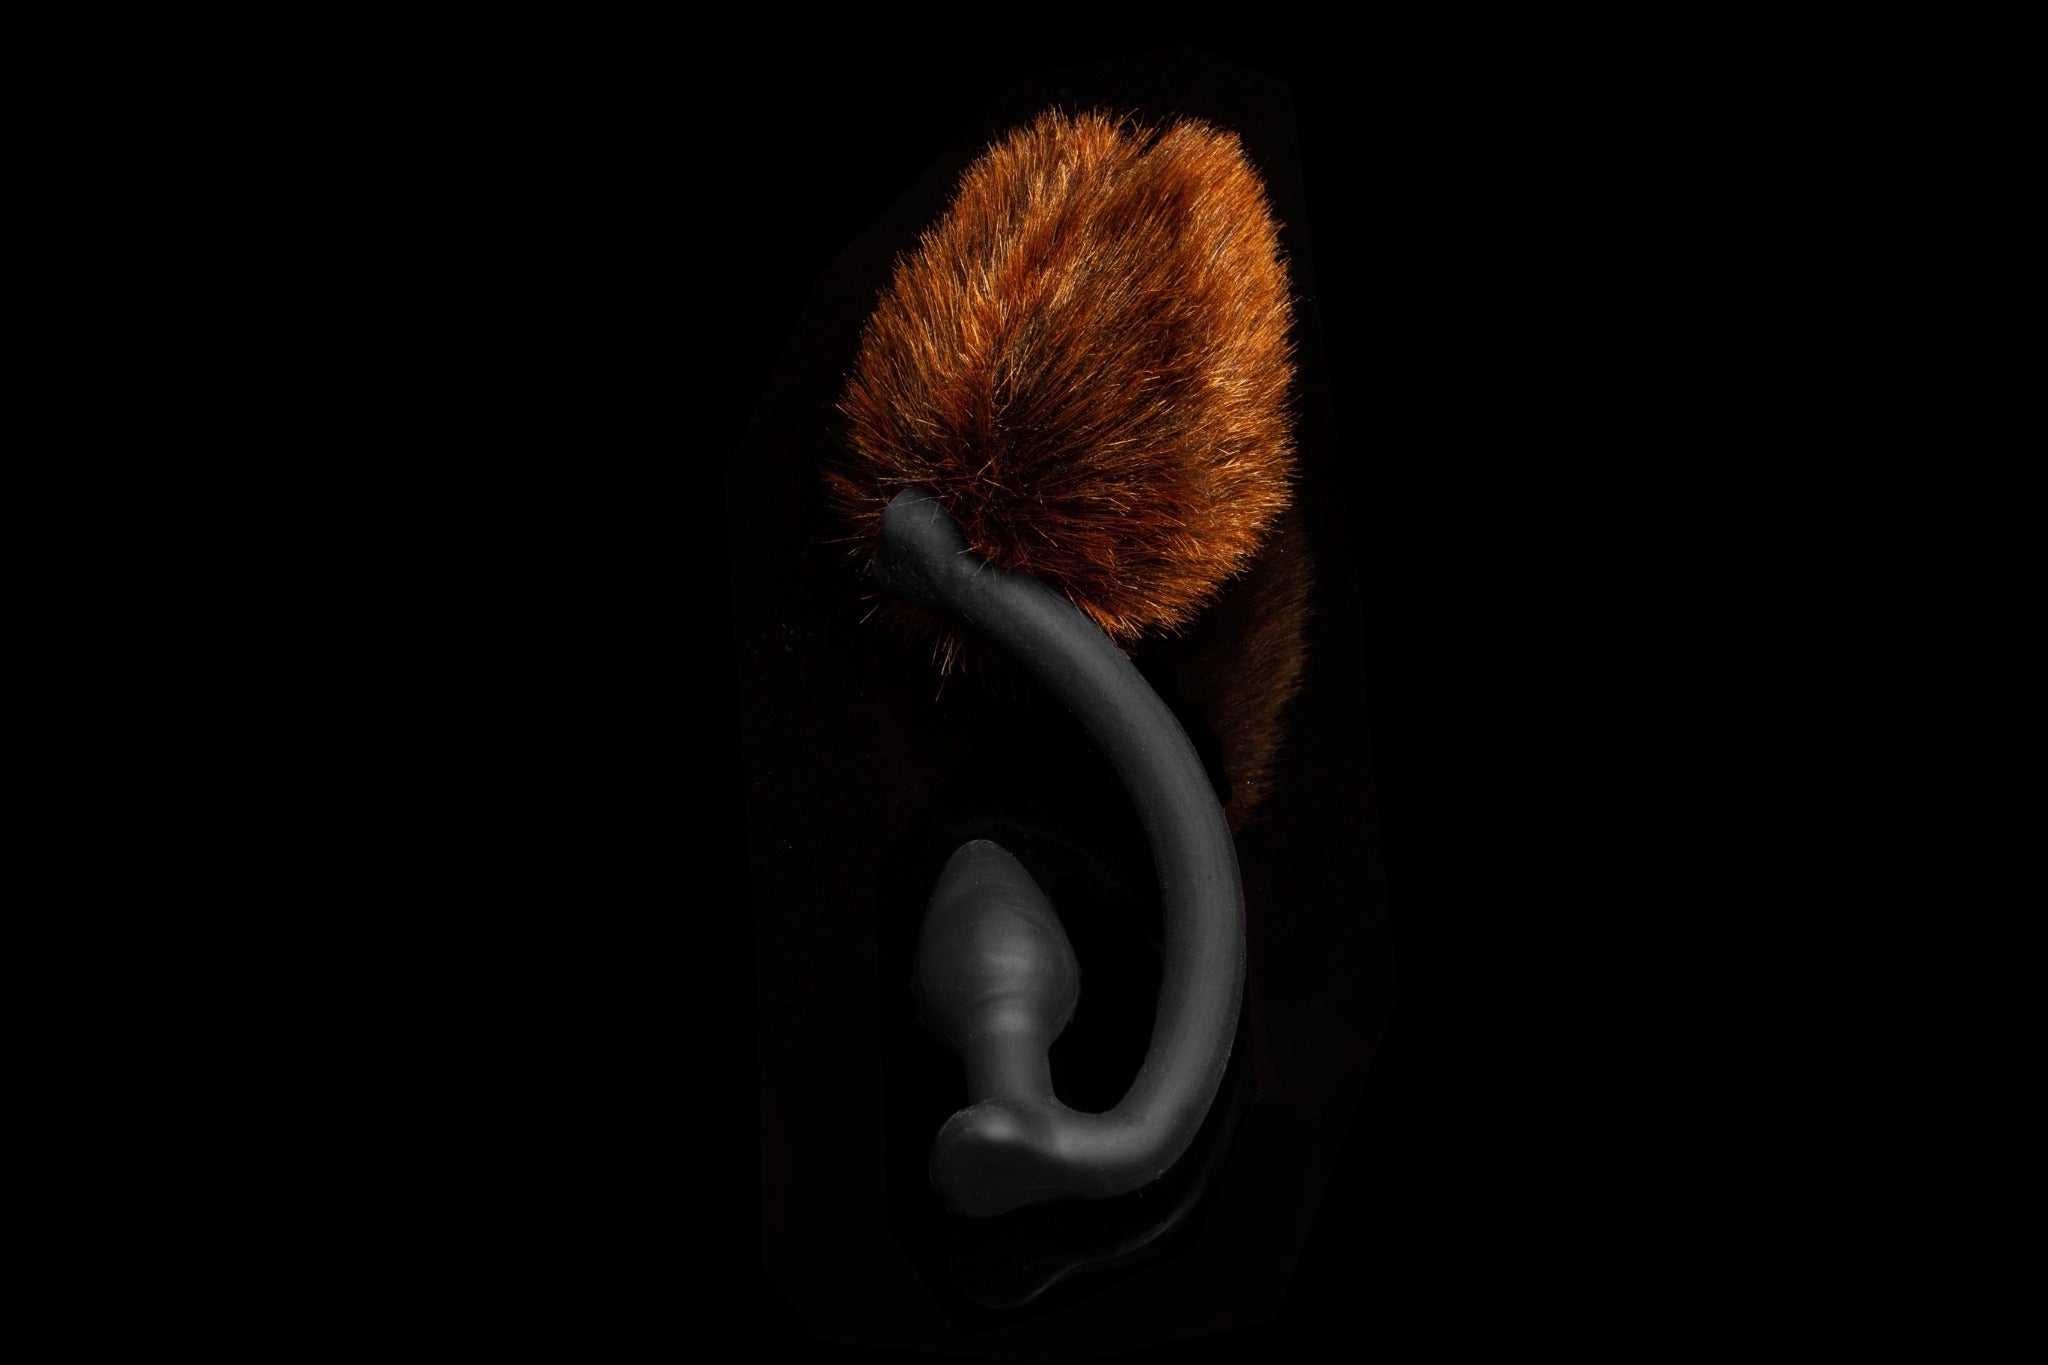 Brown Bear tail butt plug made of silicone and faux fur, but the plug is hooked so when worn, the tail sits at the bottom of the lumbar area. It’s laying flat on a black background.